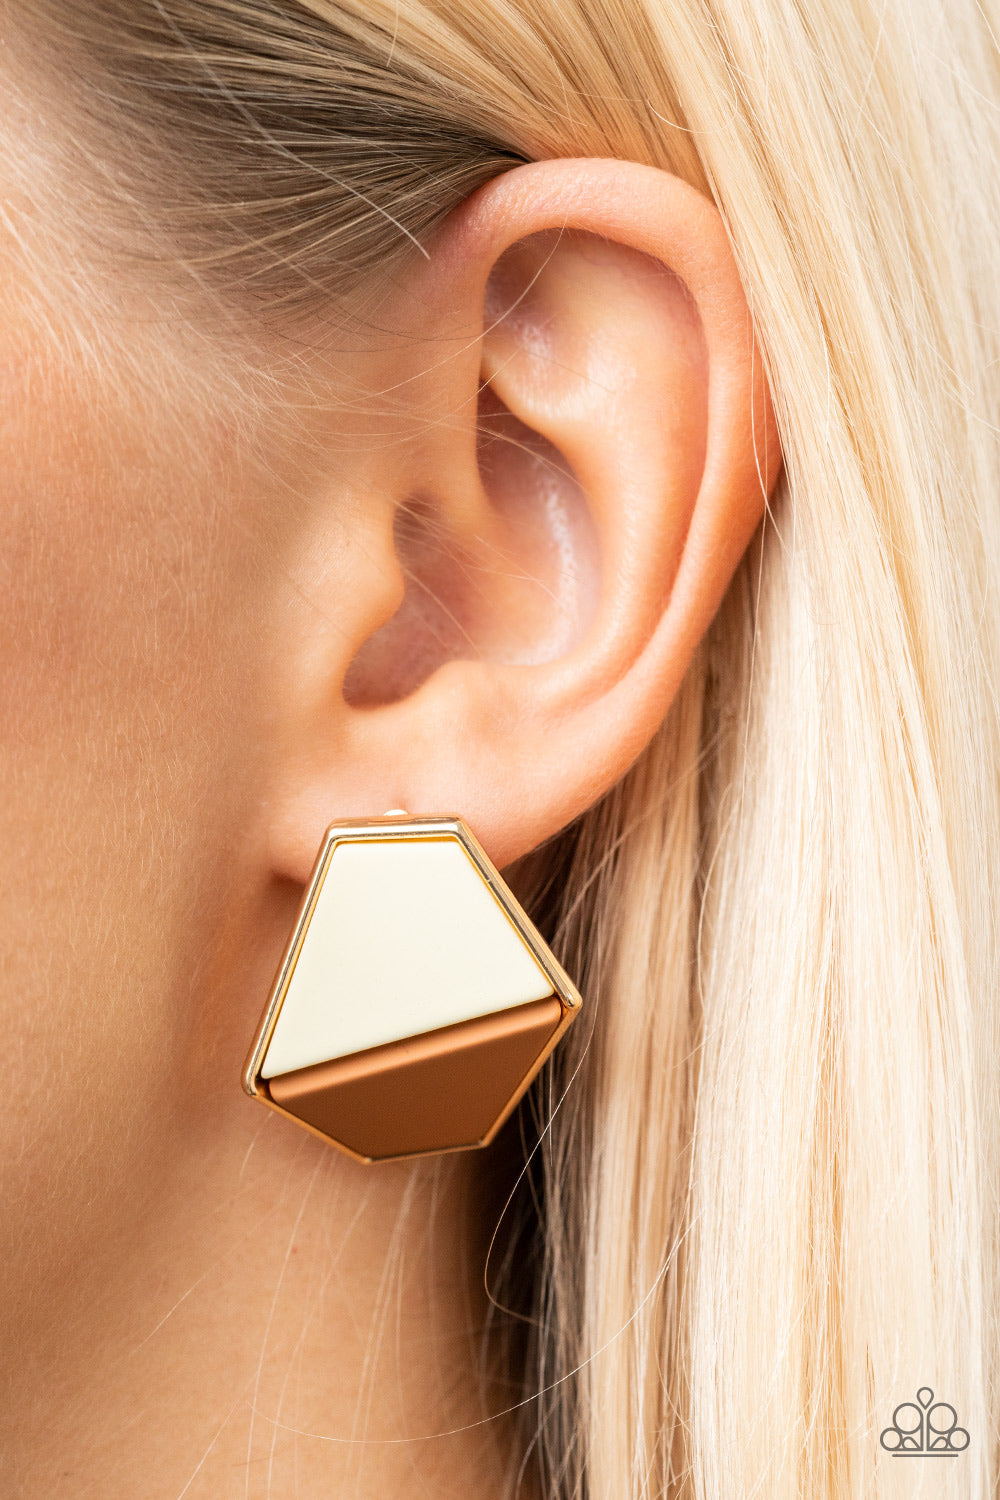 Paparazzi Accessories Generically Geometric - Brown Featuring a matte finish, white and brown trapezoidal frames are encased in a glistening gold frame that gently folds backwards for added dimension. Earring attaches to a standard post fitting. Sold as o